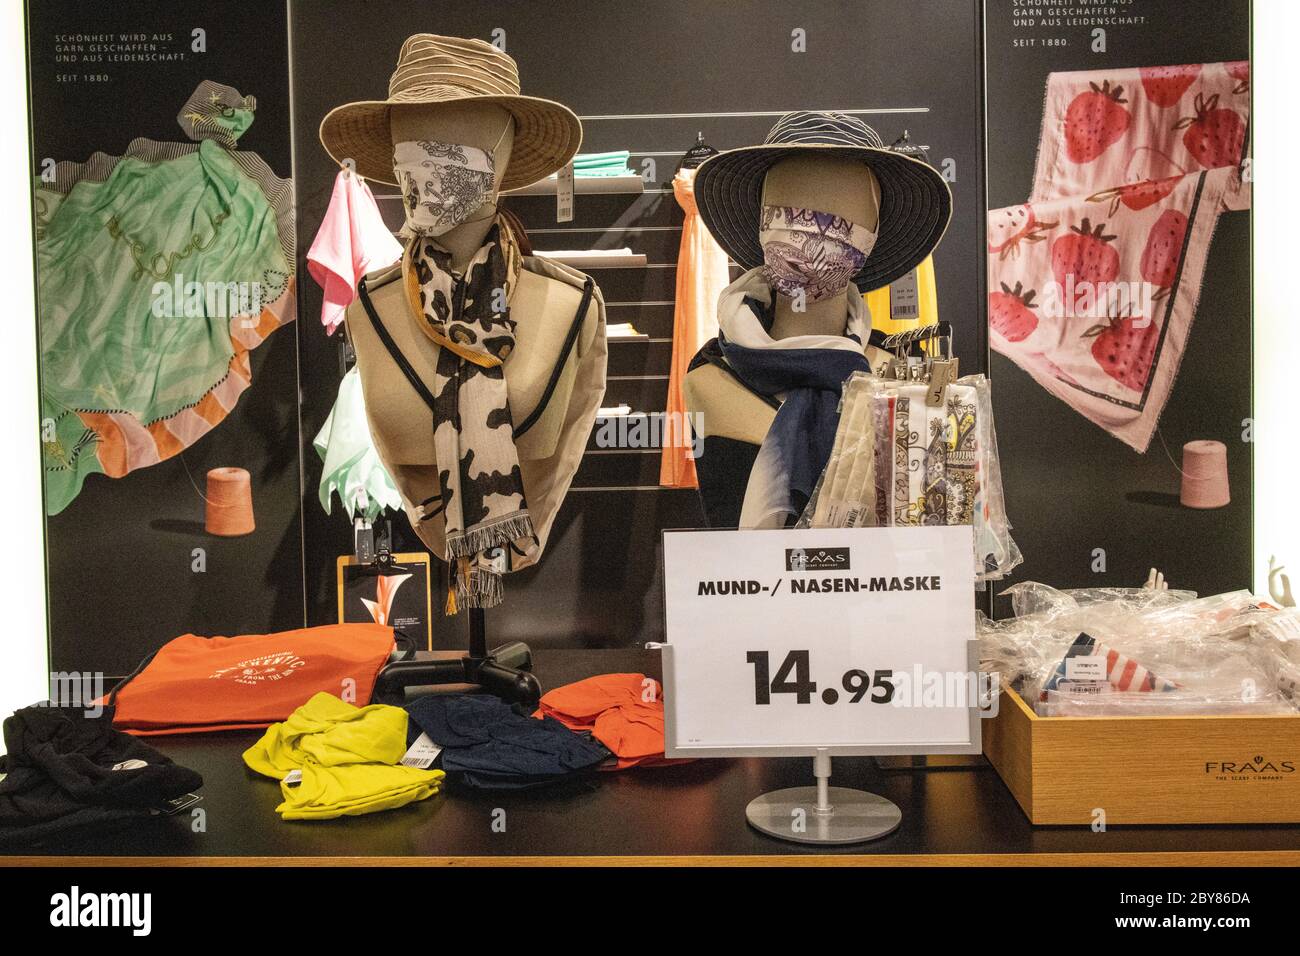 Fashion department selling face masks in its clothing section during the coronavirus pandemic as shops open up to the public, Germany, Europe Stock Photo